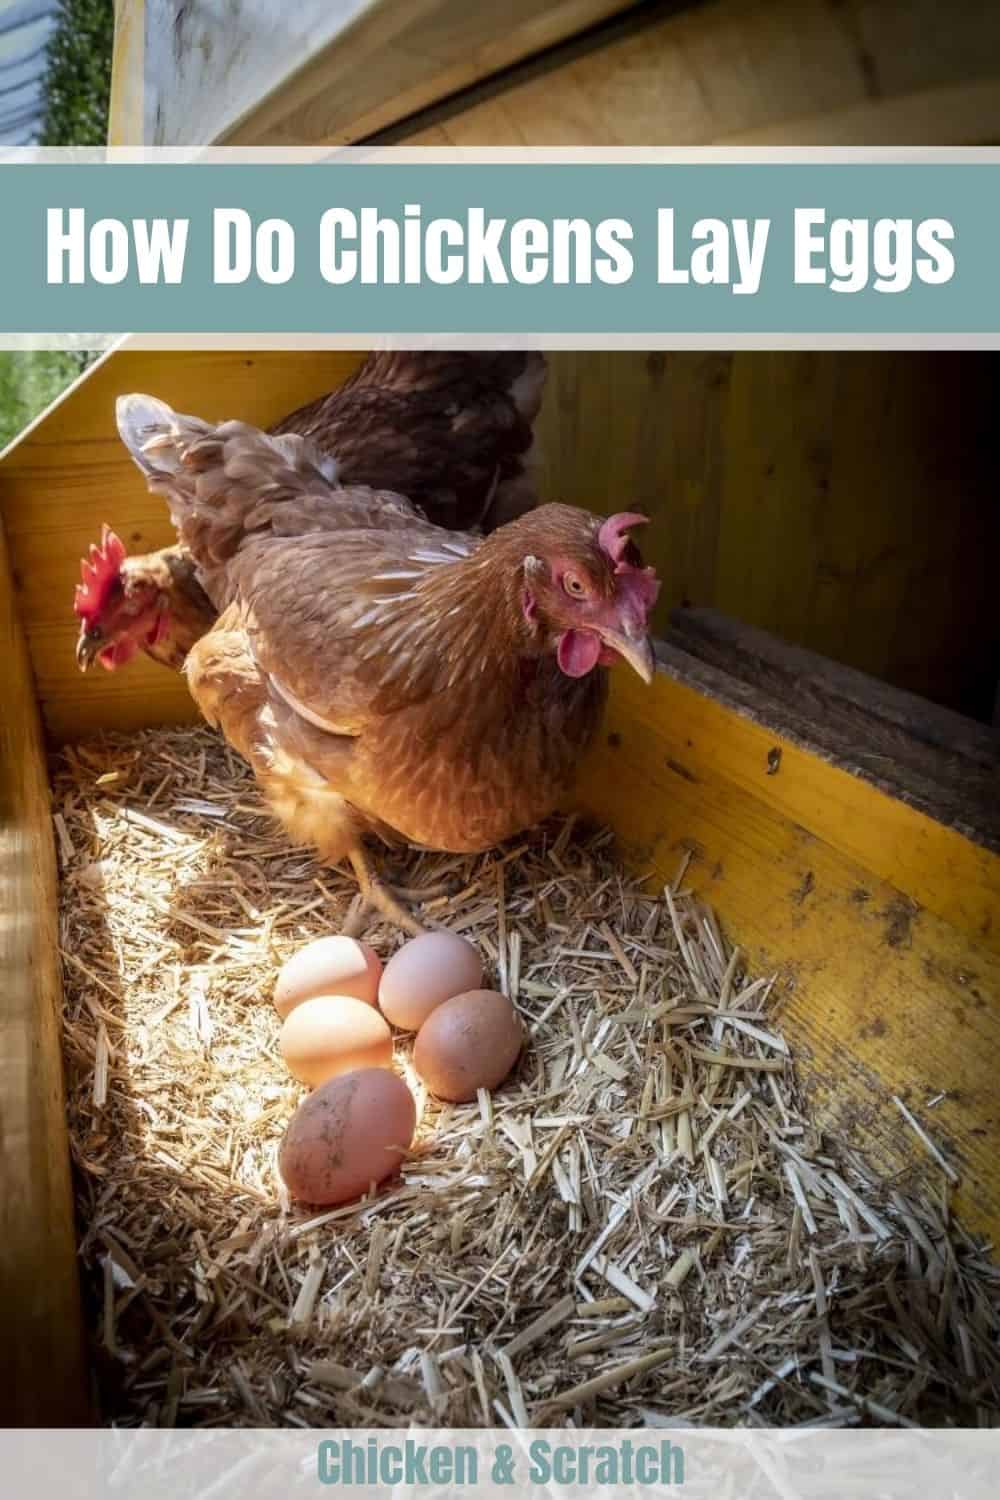 Understanding The Egg Laying Process